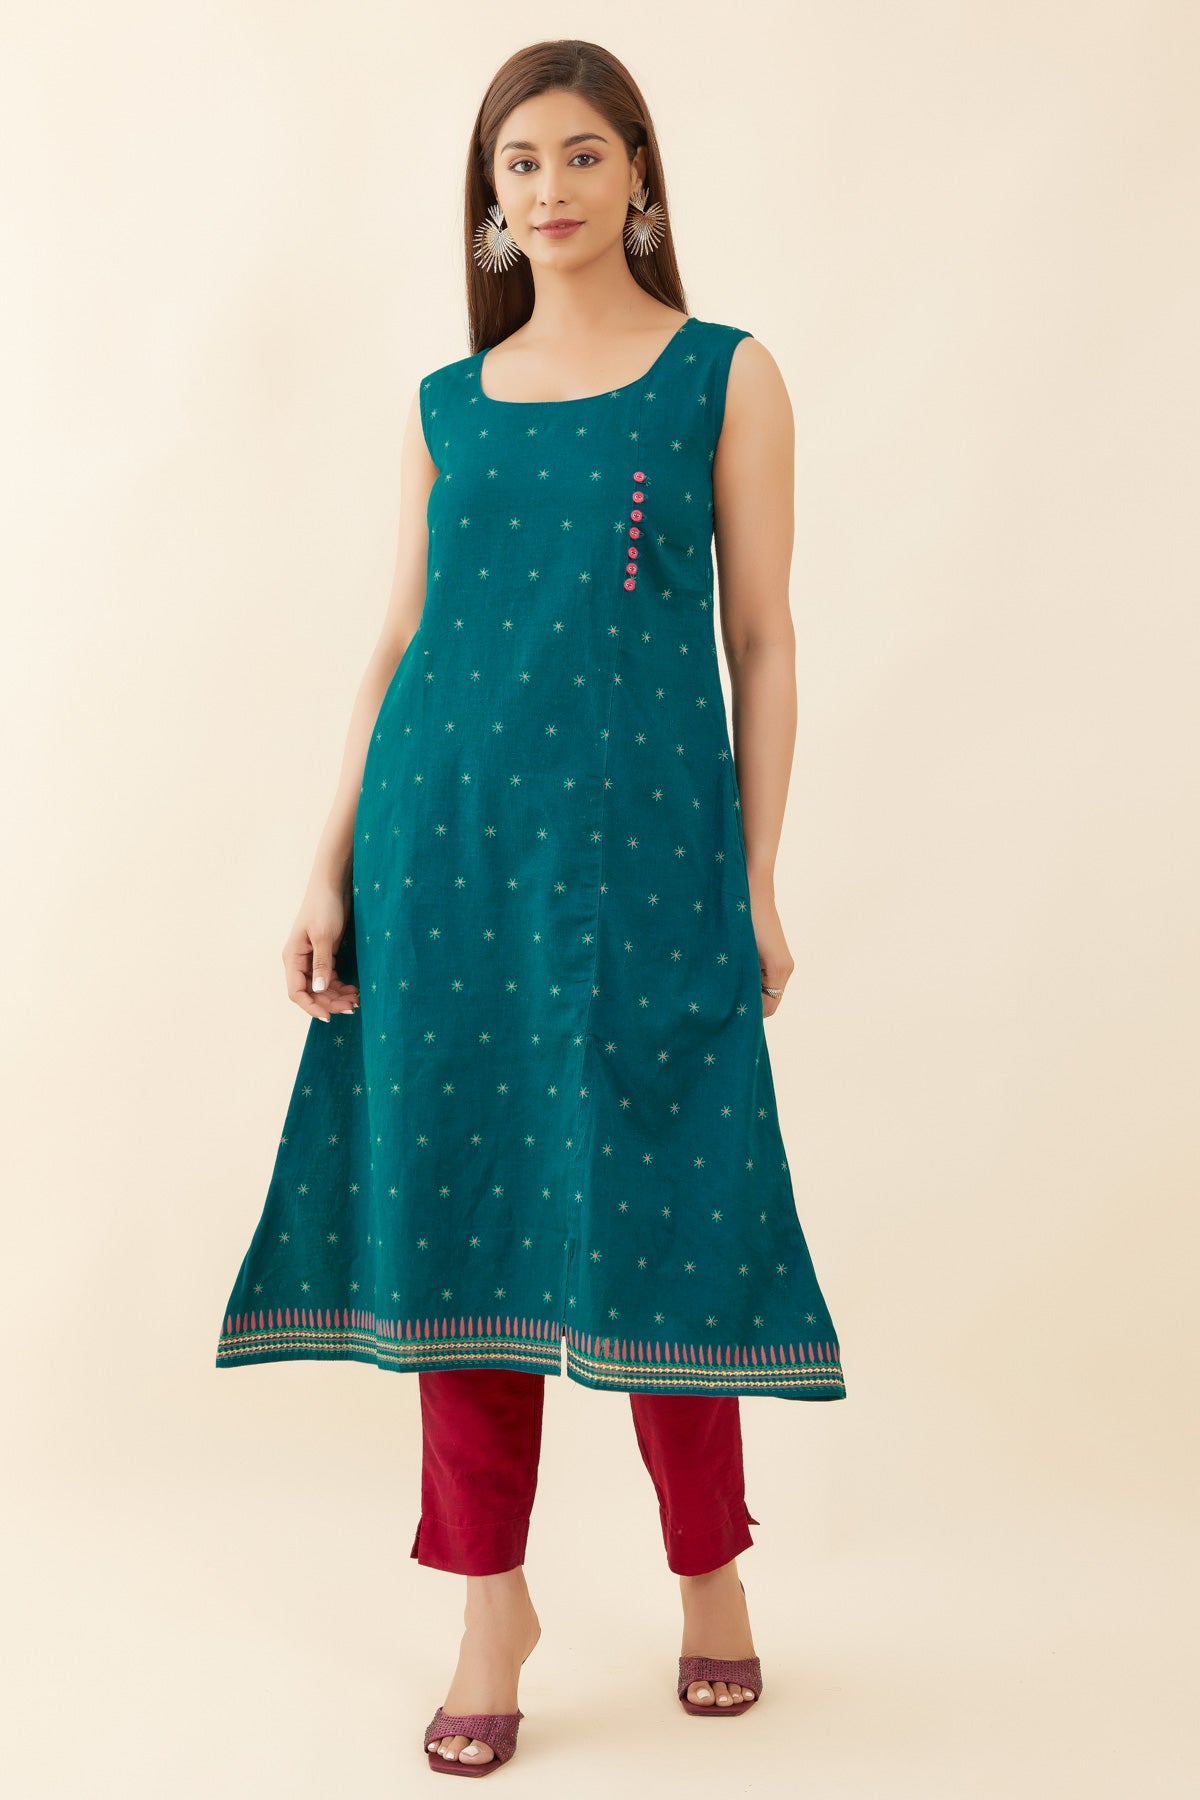 All Over Floral Sleeveless With Side Slit A-Line Kurta - Green